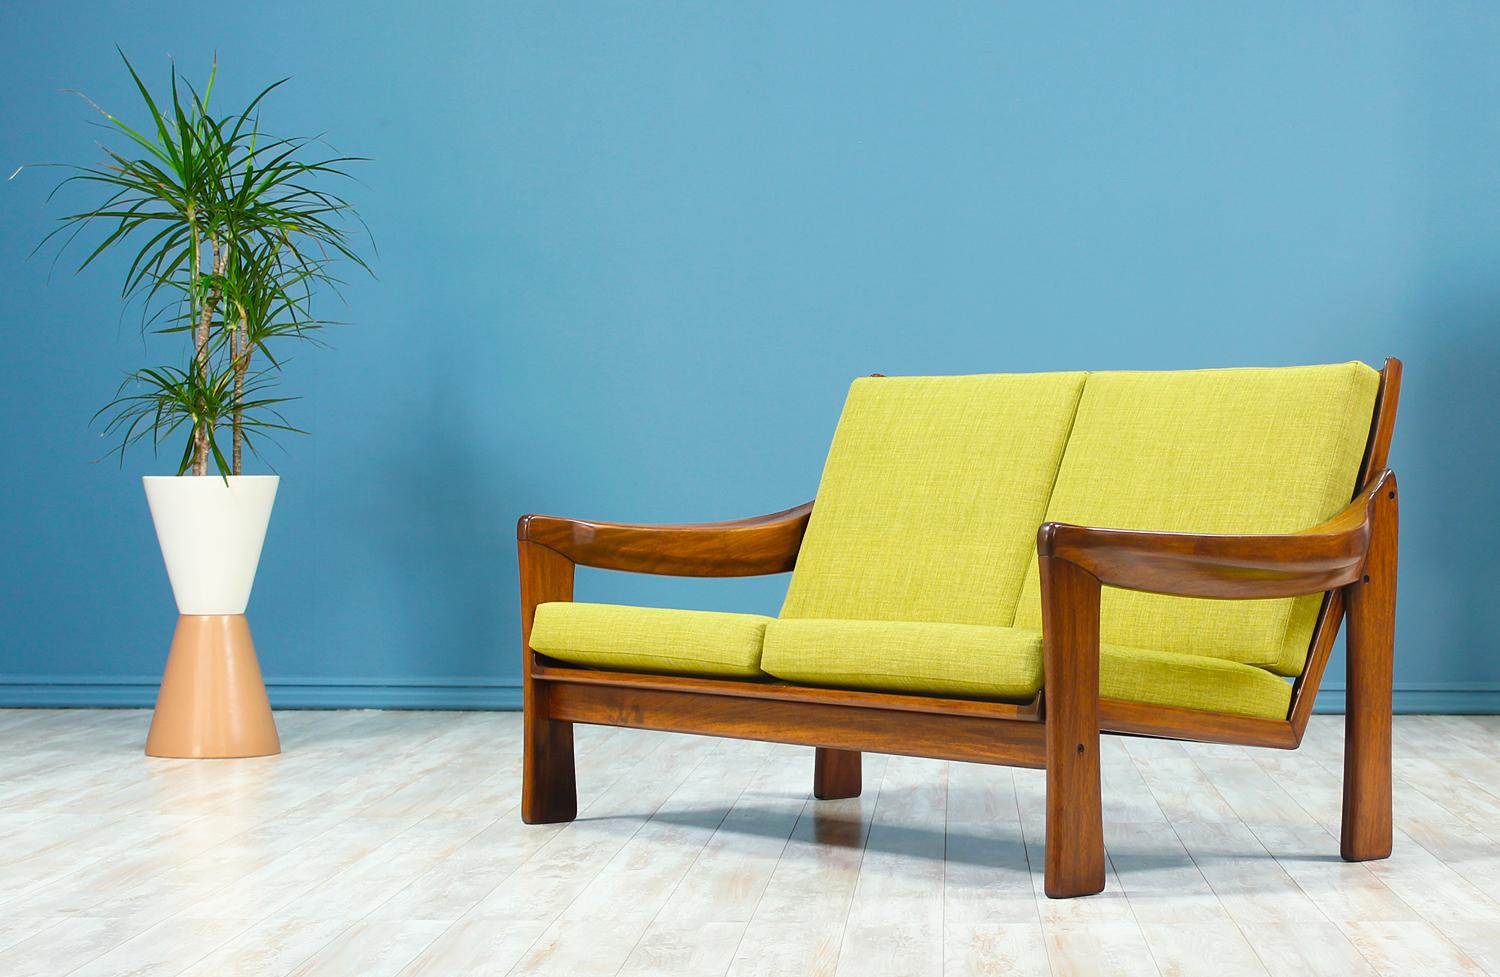 Wonderfully sculpted wood settee manufactured in the United States, circa 1960s. This Mid-Century Modern settee is crafted in solid mahogany wood and features new high-density foam loose cushions recently upholstered in a quality green fabric. The